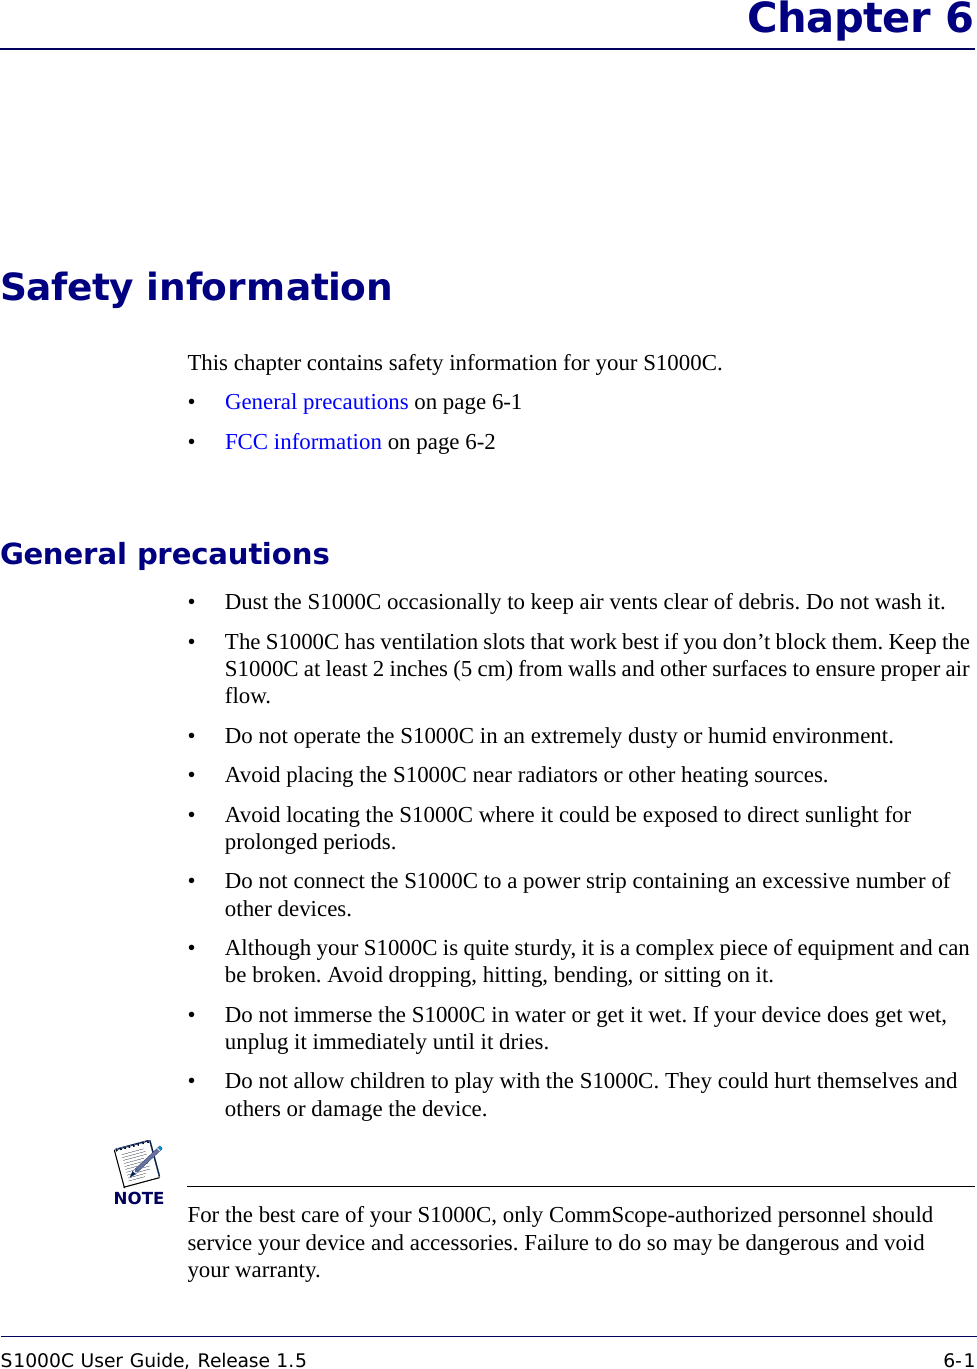 S1000C User Guide, Release 1.5 6-1DRAFT Chapter 6Safety informationThis chapter contains safety information for your S1000C.•General precautions on page 6-1•FCC information on page 6-2General precautions• Dust the S1000C occasionally to keep air vents clear of debris. Do not wash it.• The S1000C has ventilation slots that work best if you don’t block them. Keep the S1000C at least 2 inches (5 cm) from walls and other surfaces to ensure proper air flow.• Do not operate the S1000C in an extremely dusty or humid environment.• Avoid placing the S1000C near radiators or other heating sources.• Avoid locating the S1000C where it could be exposed to direct sunlight for prolonged periods.• Do not connect the S1000C to a power strip containing an excessive number of other devices.• Although your S1000C is quite sturdy, it is a complex piece of equipment and can be broken. Avoid dropping, hitting, bending, or sitting on it.• Do not immerse the S1000C in water or get it wet. If your device does get wet, unplug it immediately until it dries.• Do not allow children to play with the S1000C. They could hurt themselves and others or damage the device. NOTEFor the best care of your S1000C, only CommScope-authorized personnel should service your device and accessories. Failure to do so may be dangerous and void your warranty. 